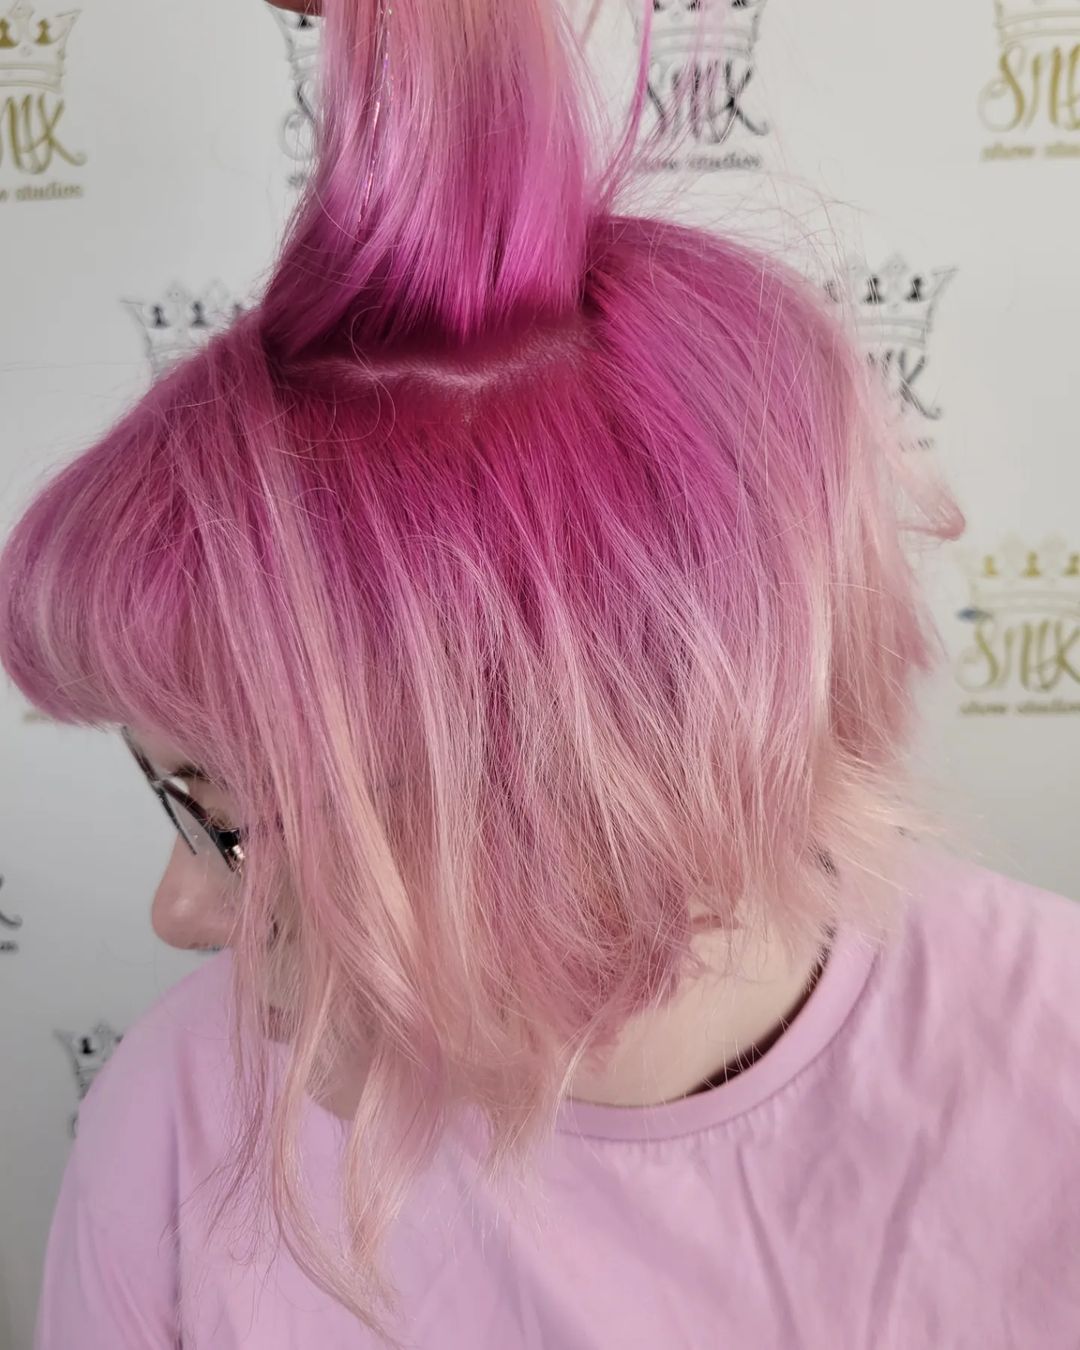 pink ombre hair color 149 Ombre pink hair blonde | Pastel pink ombre hair | Pink balayage Hair Pink Ombre Hair Color for Women